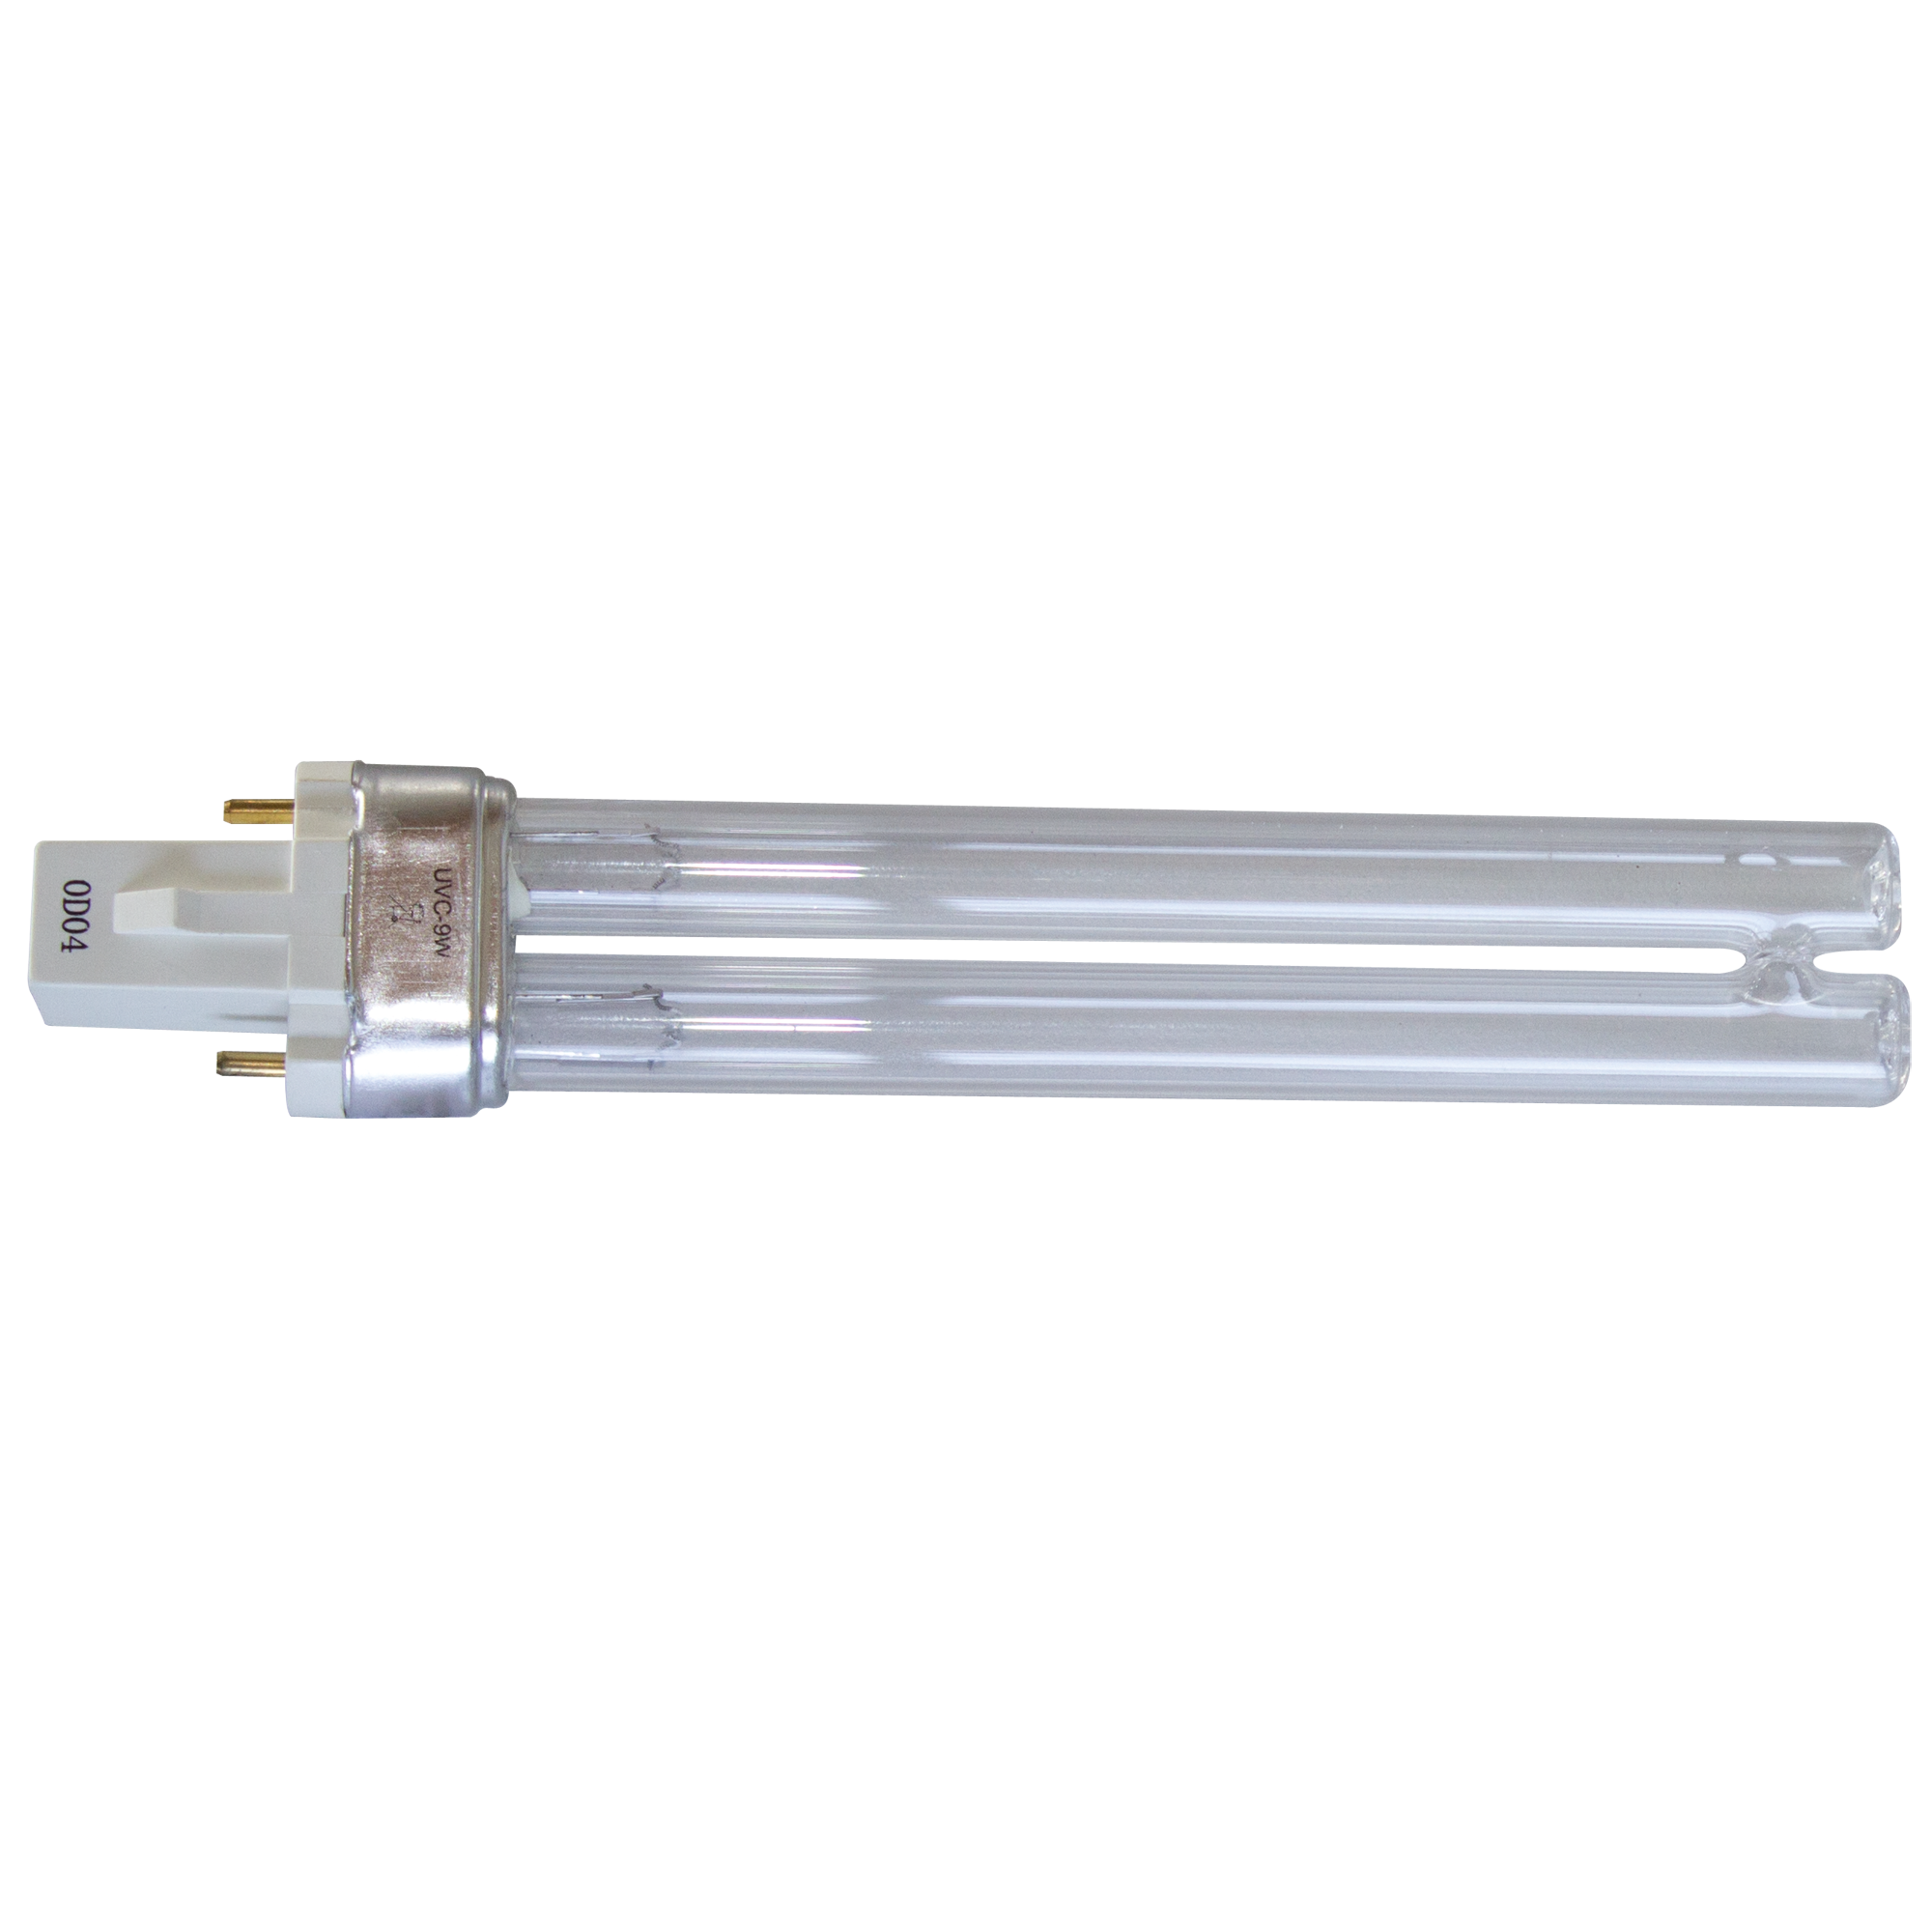 UV-Lampe 9 W/220 V + product picture